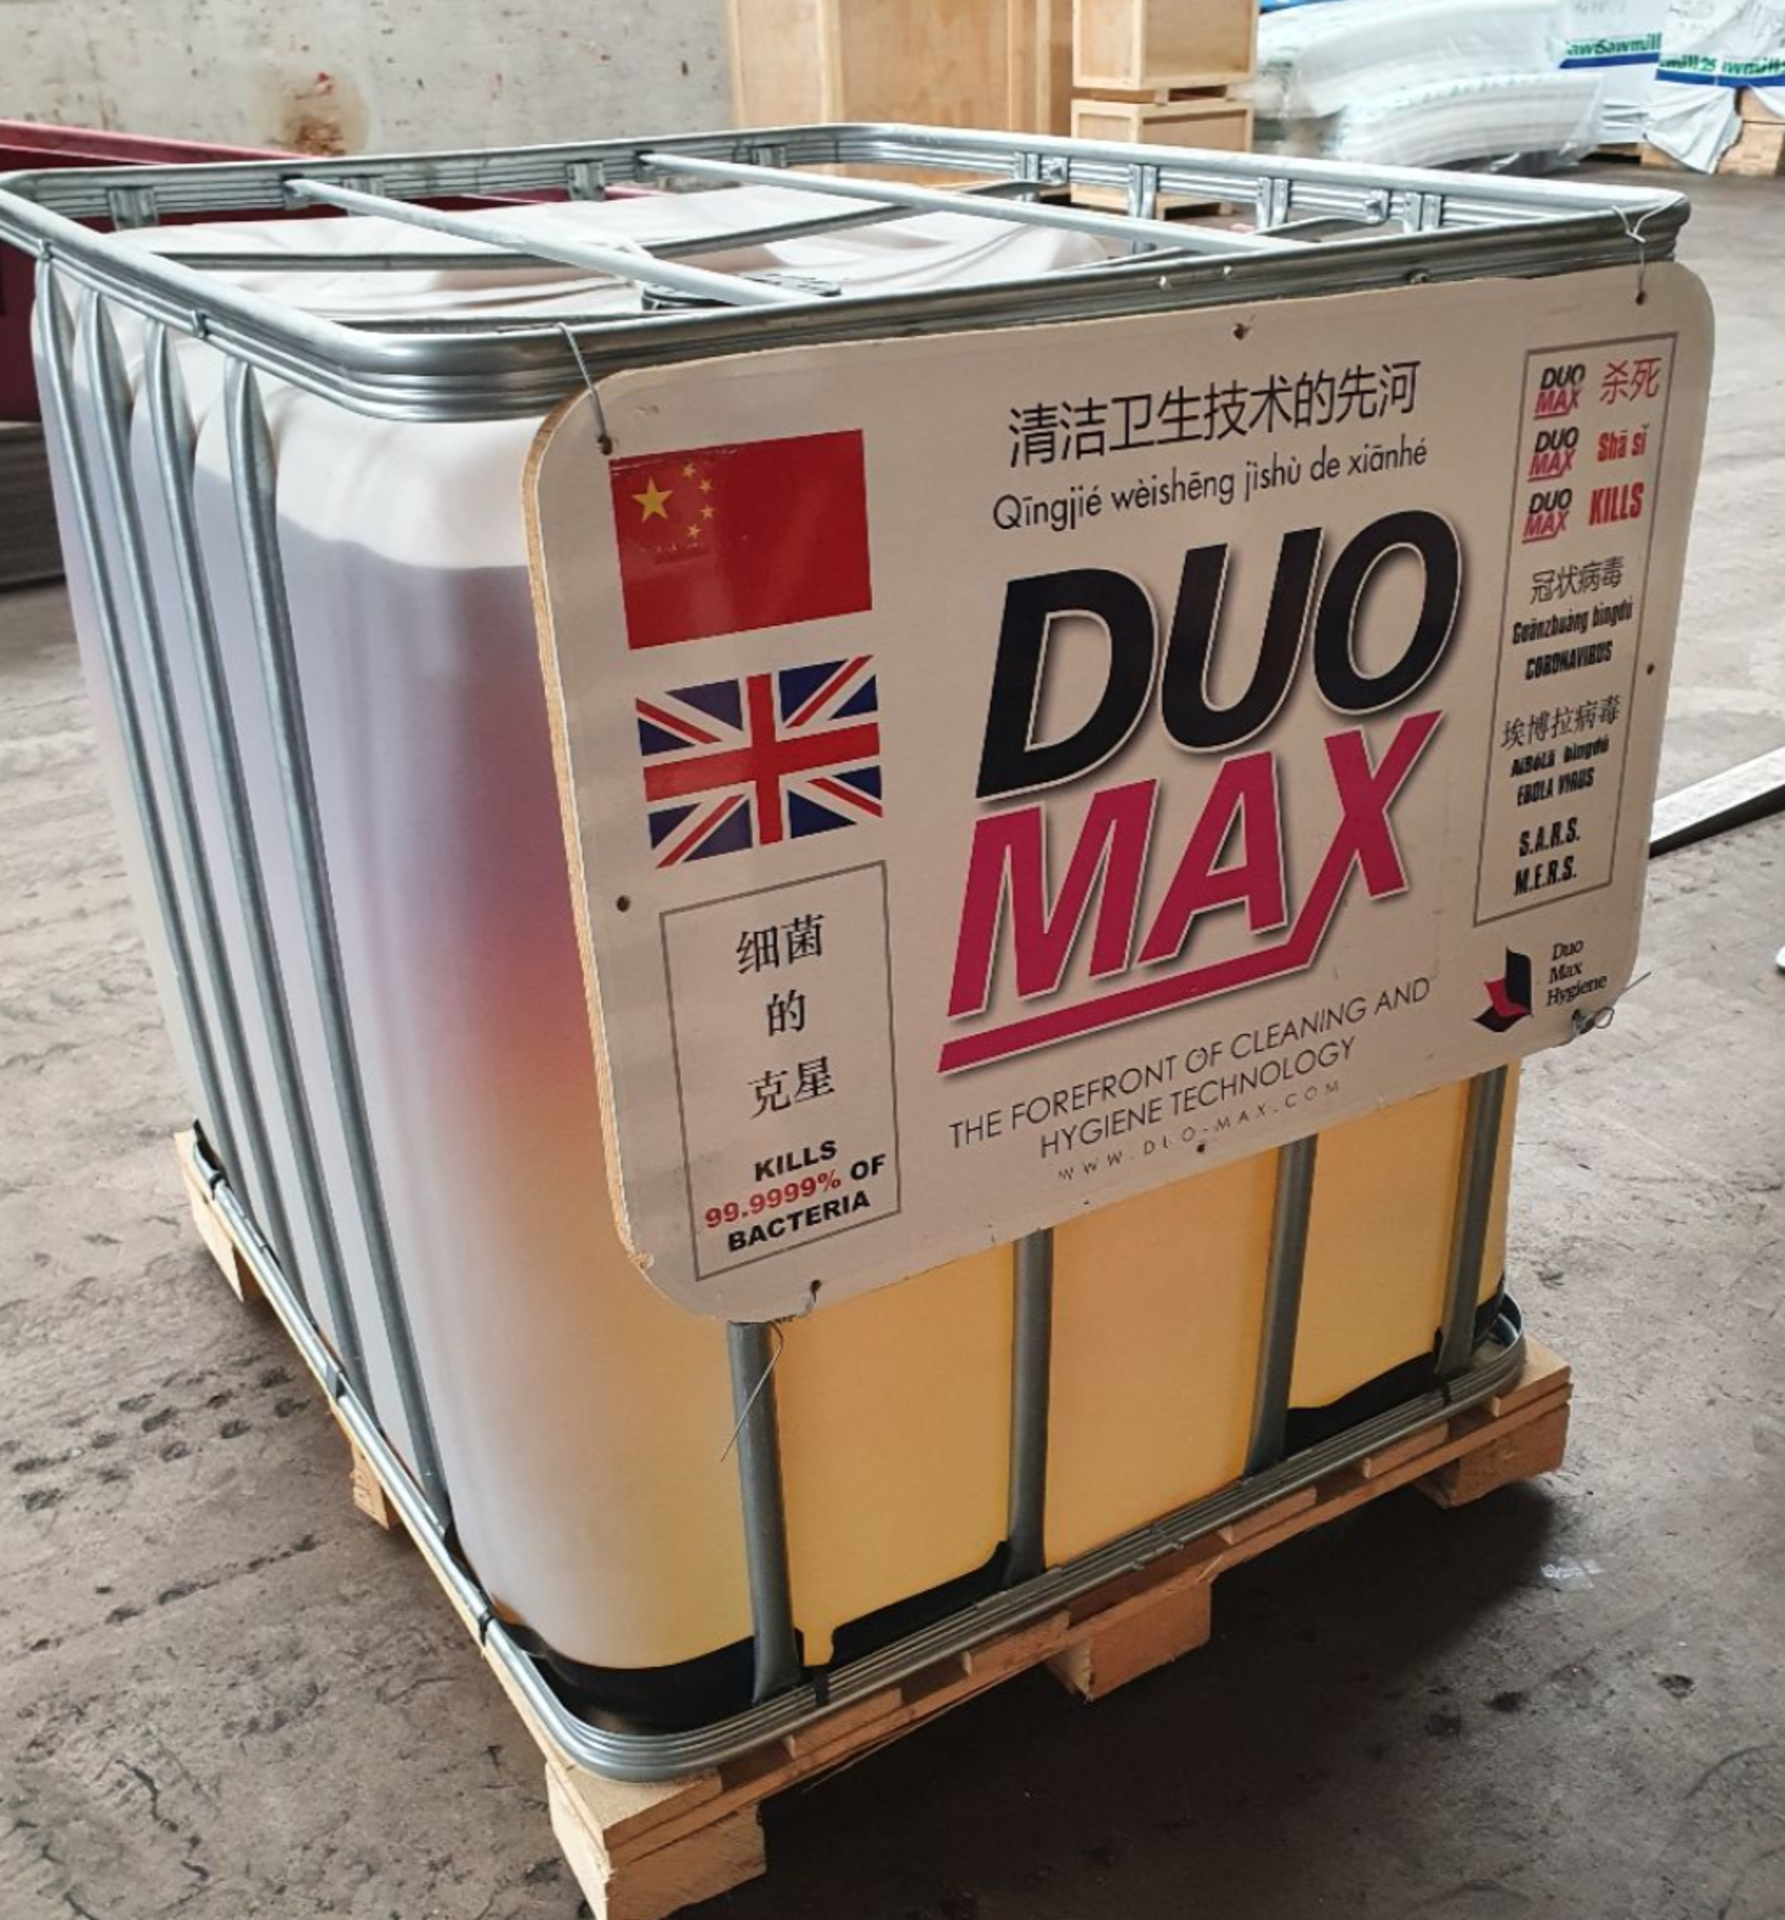 TANK OF DUOMAX SUPER CONCENTRATED DISINFECTANT, MADE IN UK, MARCH 2020, ALL DOCUMENTS ATTACHED